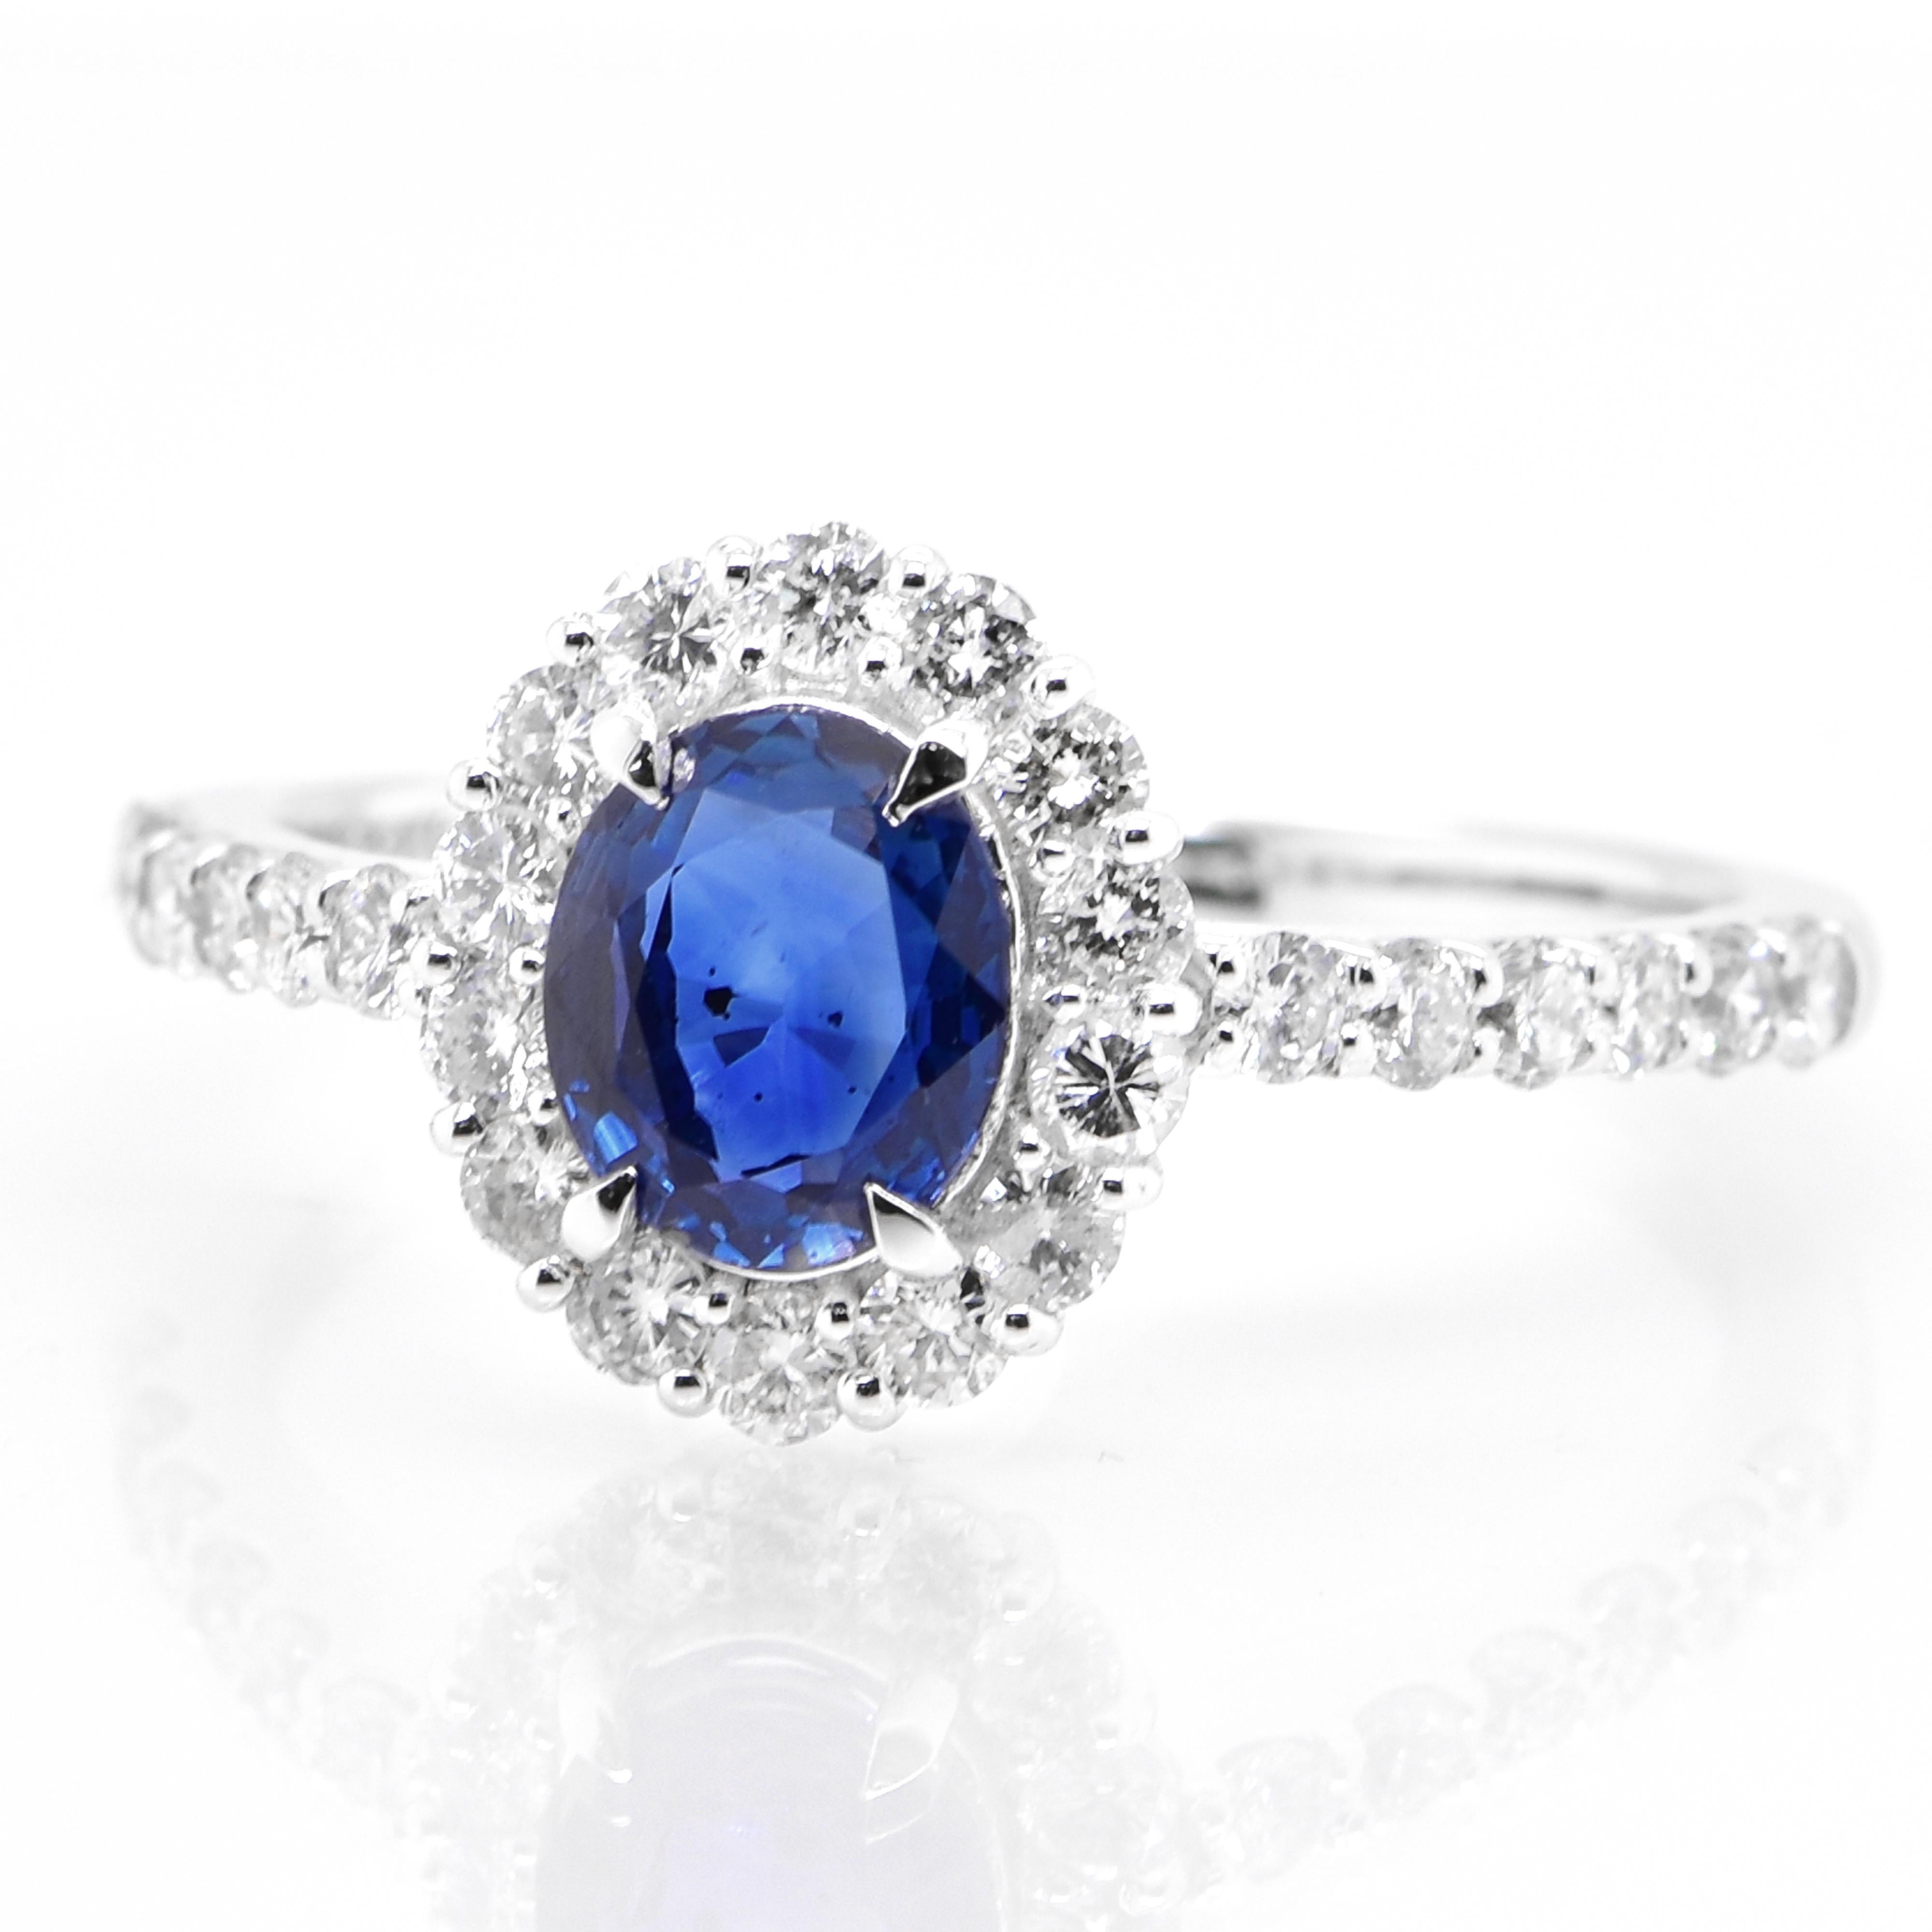 A beautiful ring featuring AIGS Certified 0.99 Carat Natural Cornflower Blue, Unheated Sapphire and 0.56 Carats Diamond Accents set in Platinum. Sapphires have extraordinary durability - they excel in hardness as well as toughness and durability